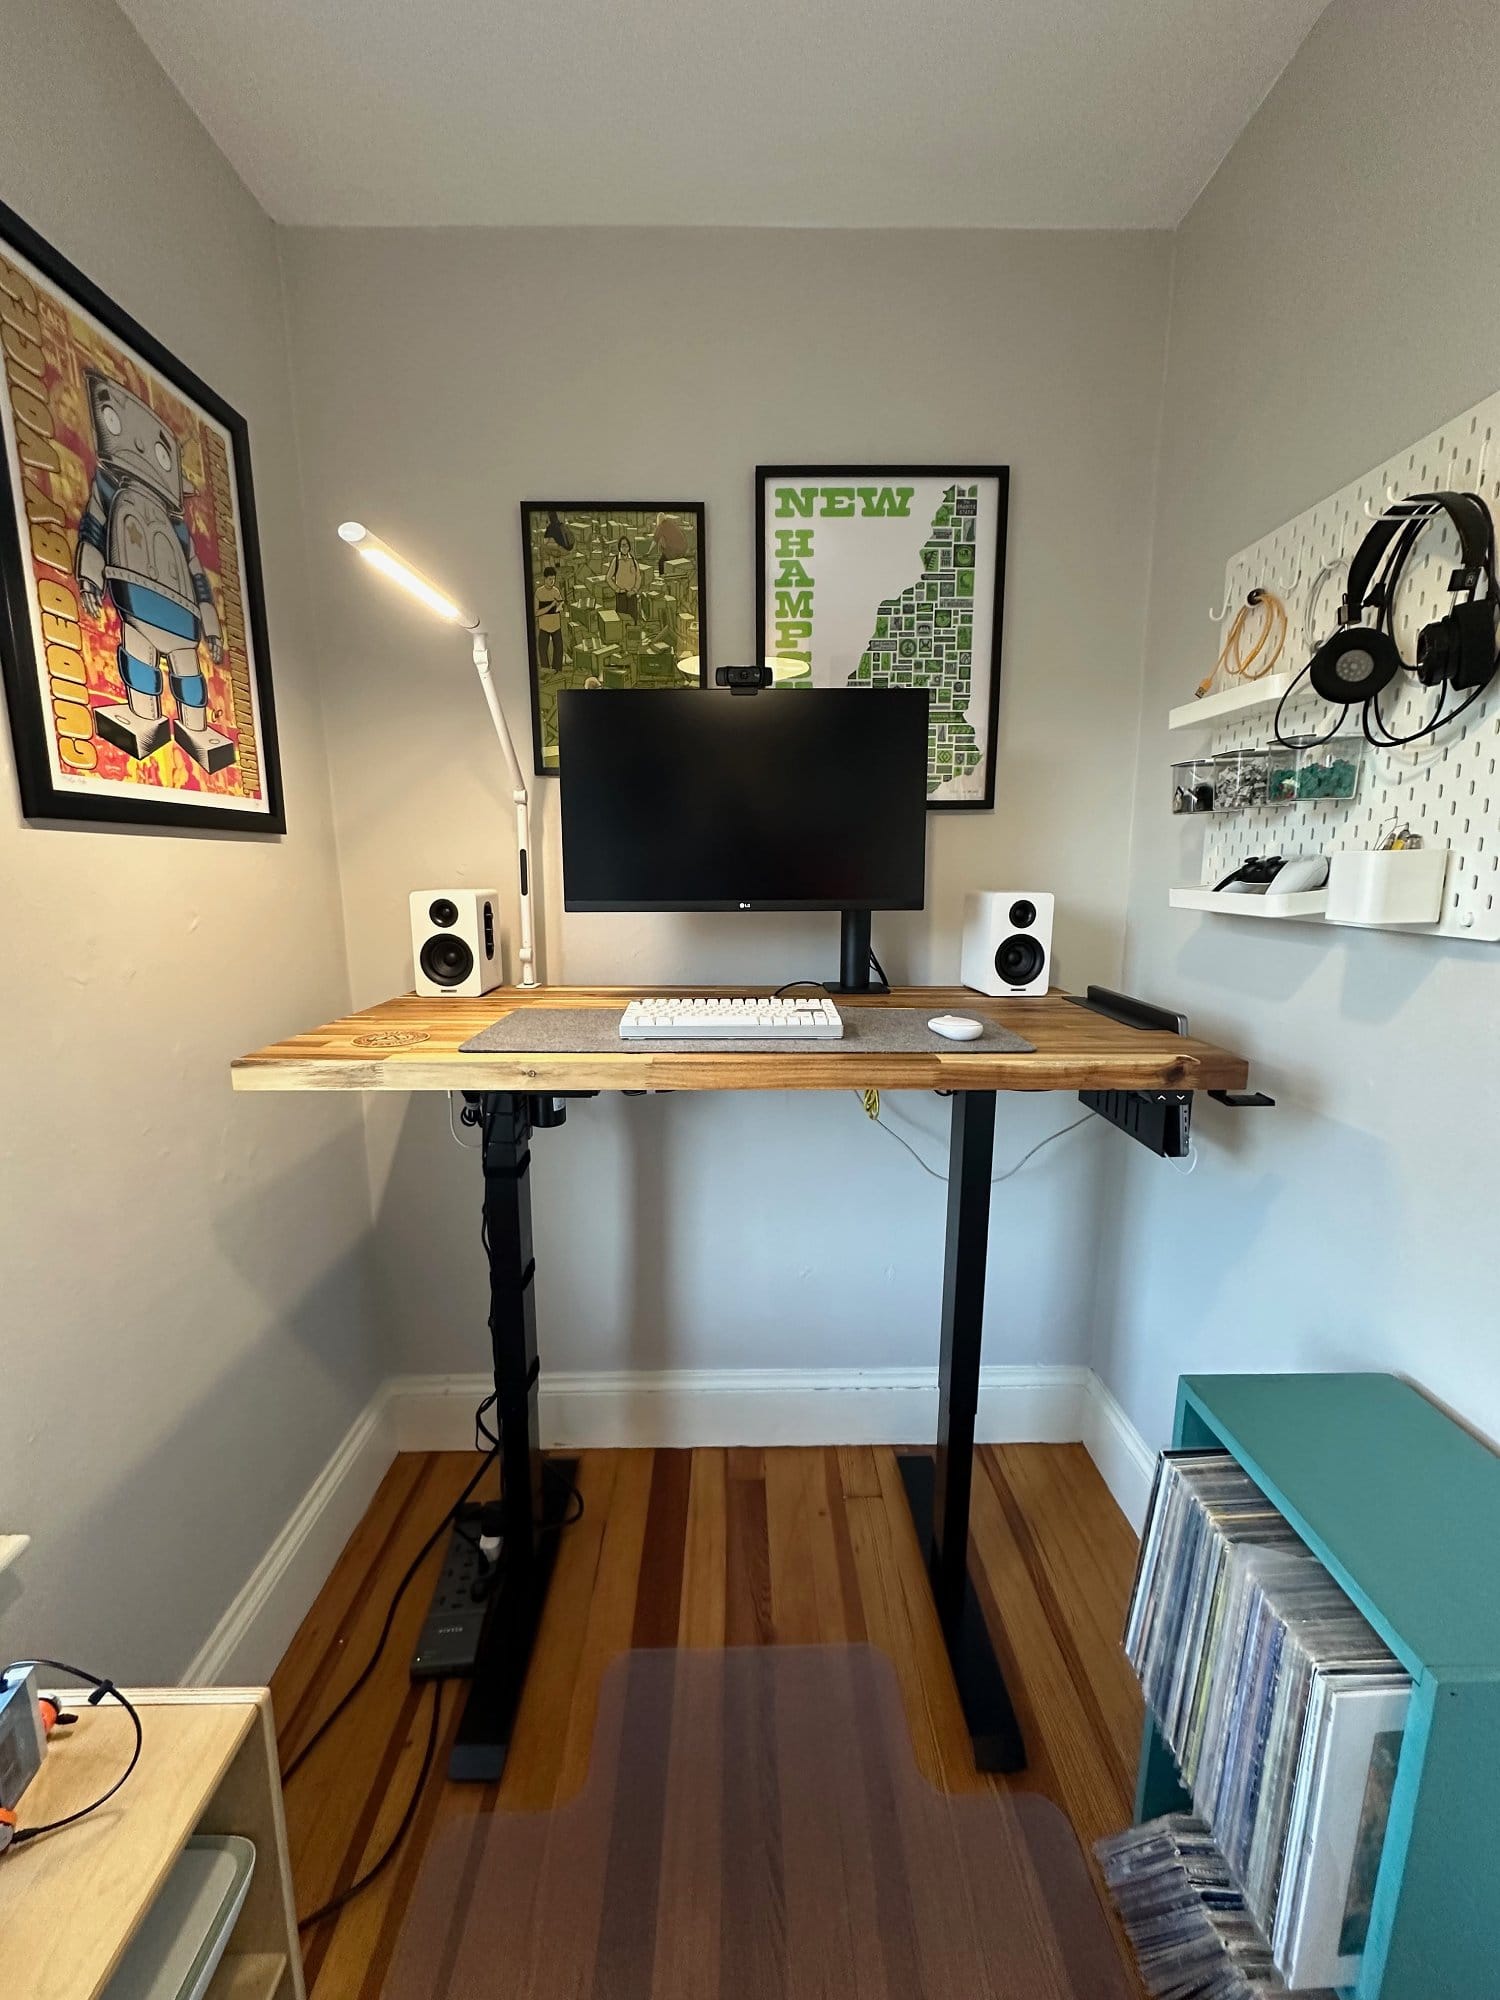 A standing desk with a computer monitor and speakers in a cosy corner, complemented by wall-mounted artwork and an organised pegboard for headphones and supplies